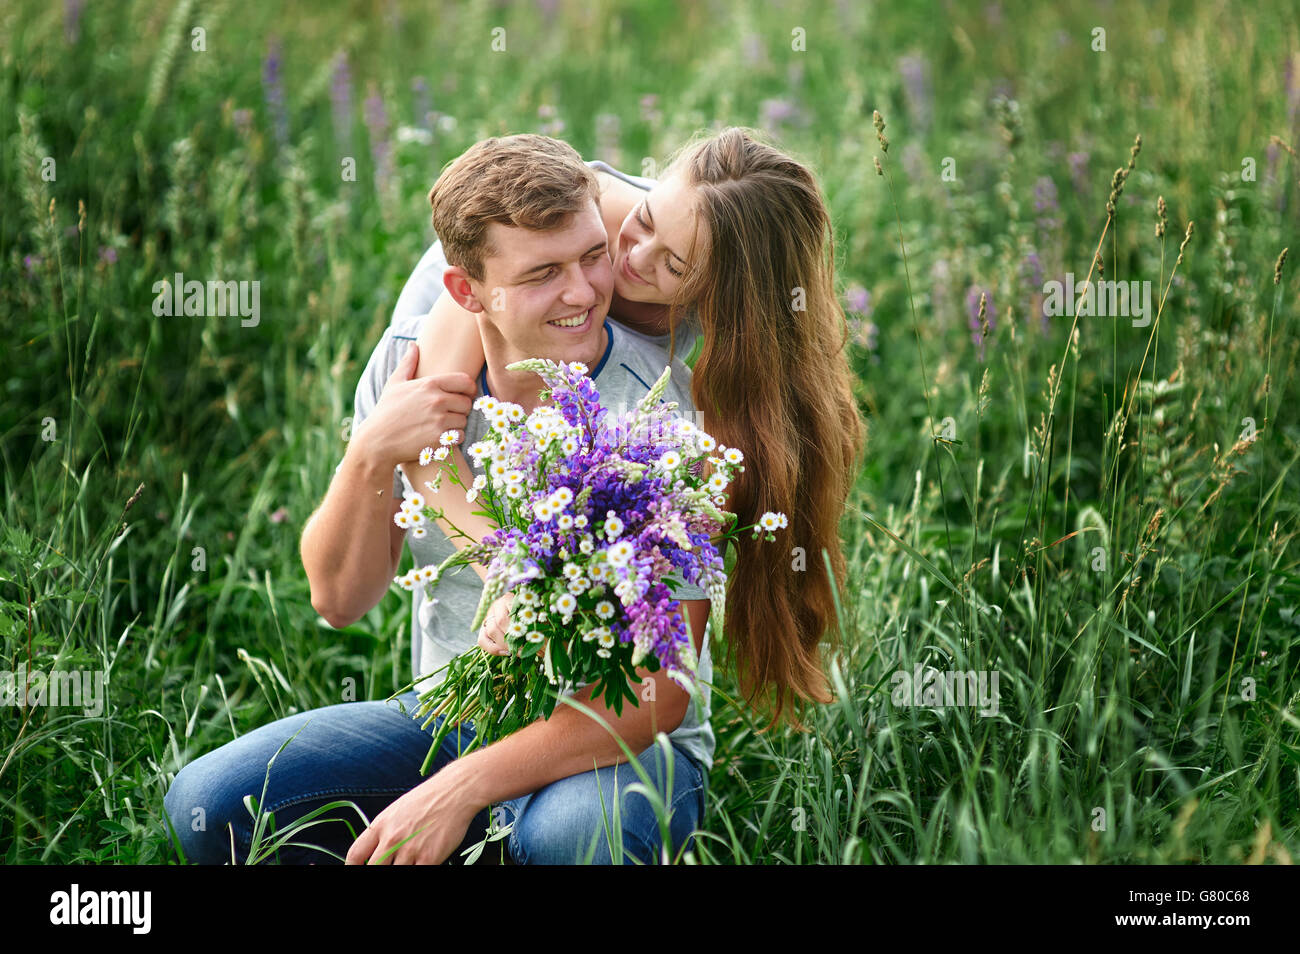 beautiful woman with bouquet of wild flowers hugging man sitting on the grass in meadow Stock Photo